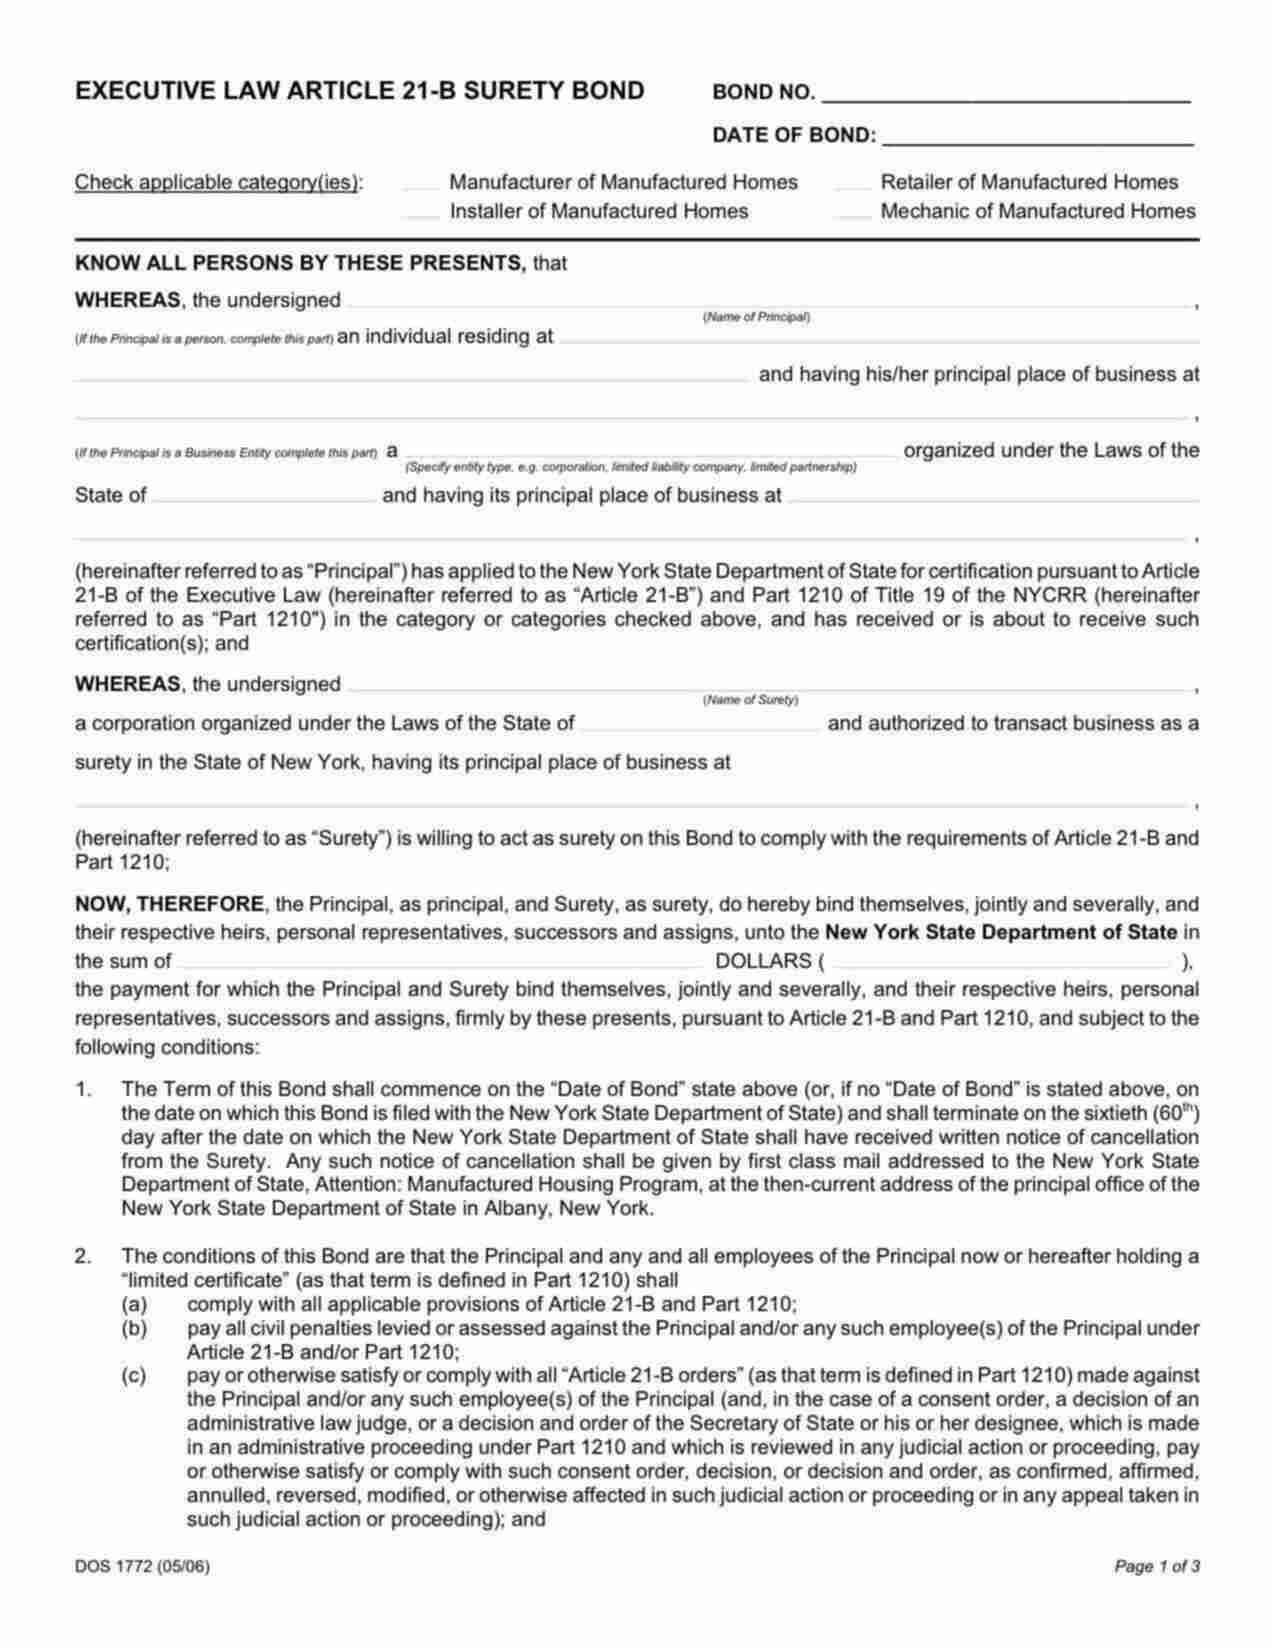 New York Mechanic of Manufactured Home - Corporation Bond Form